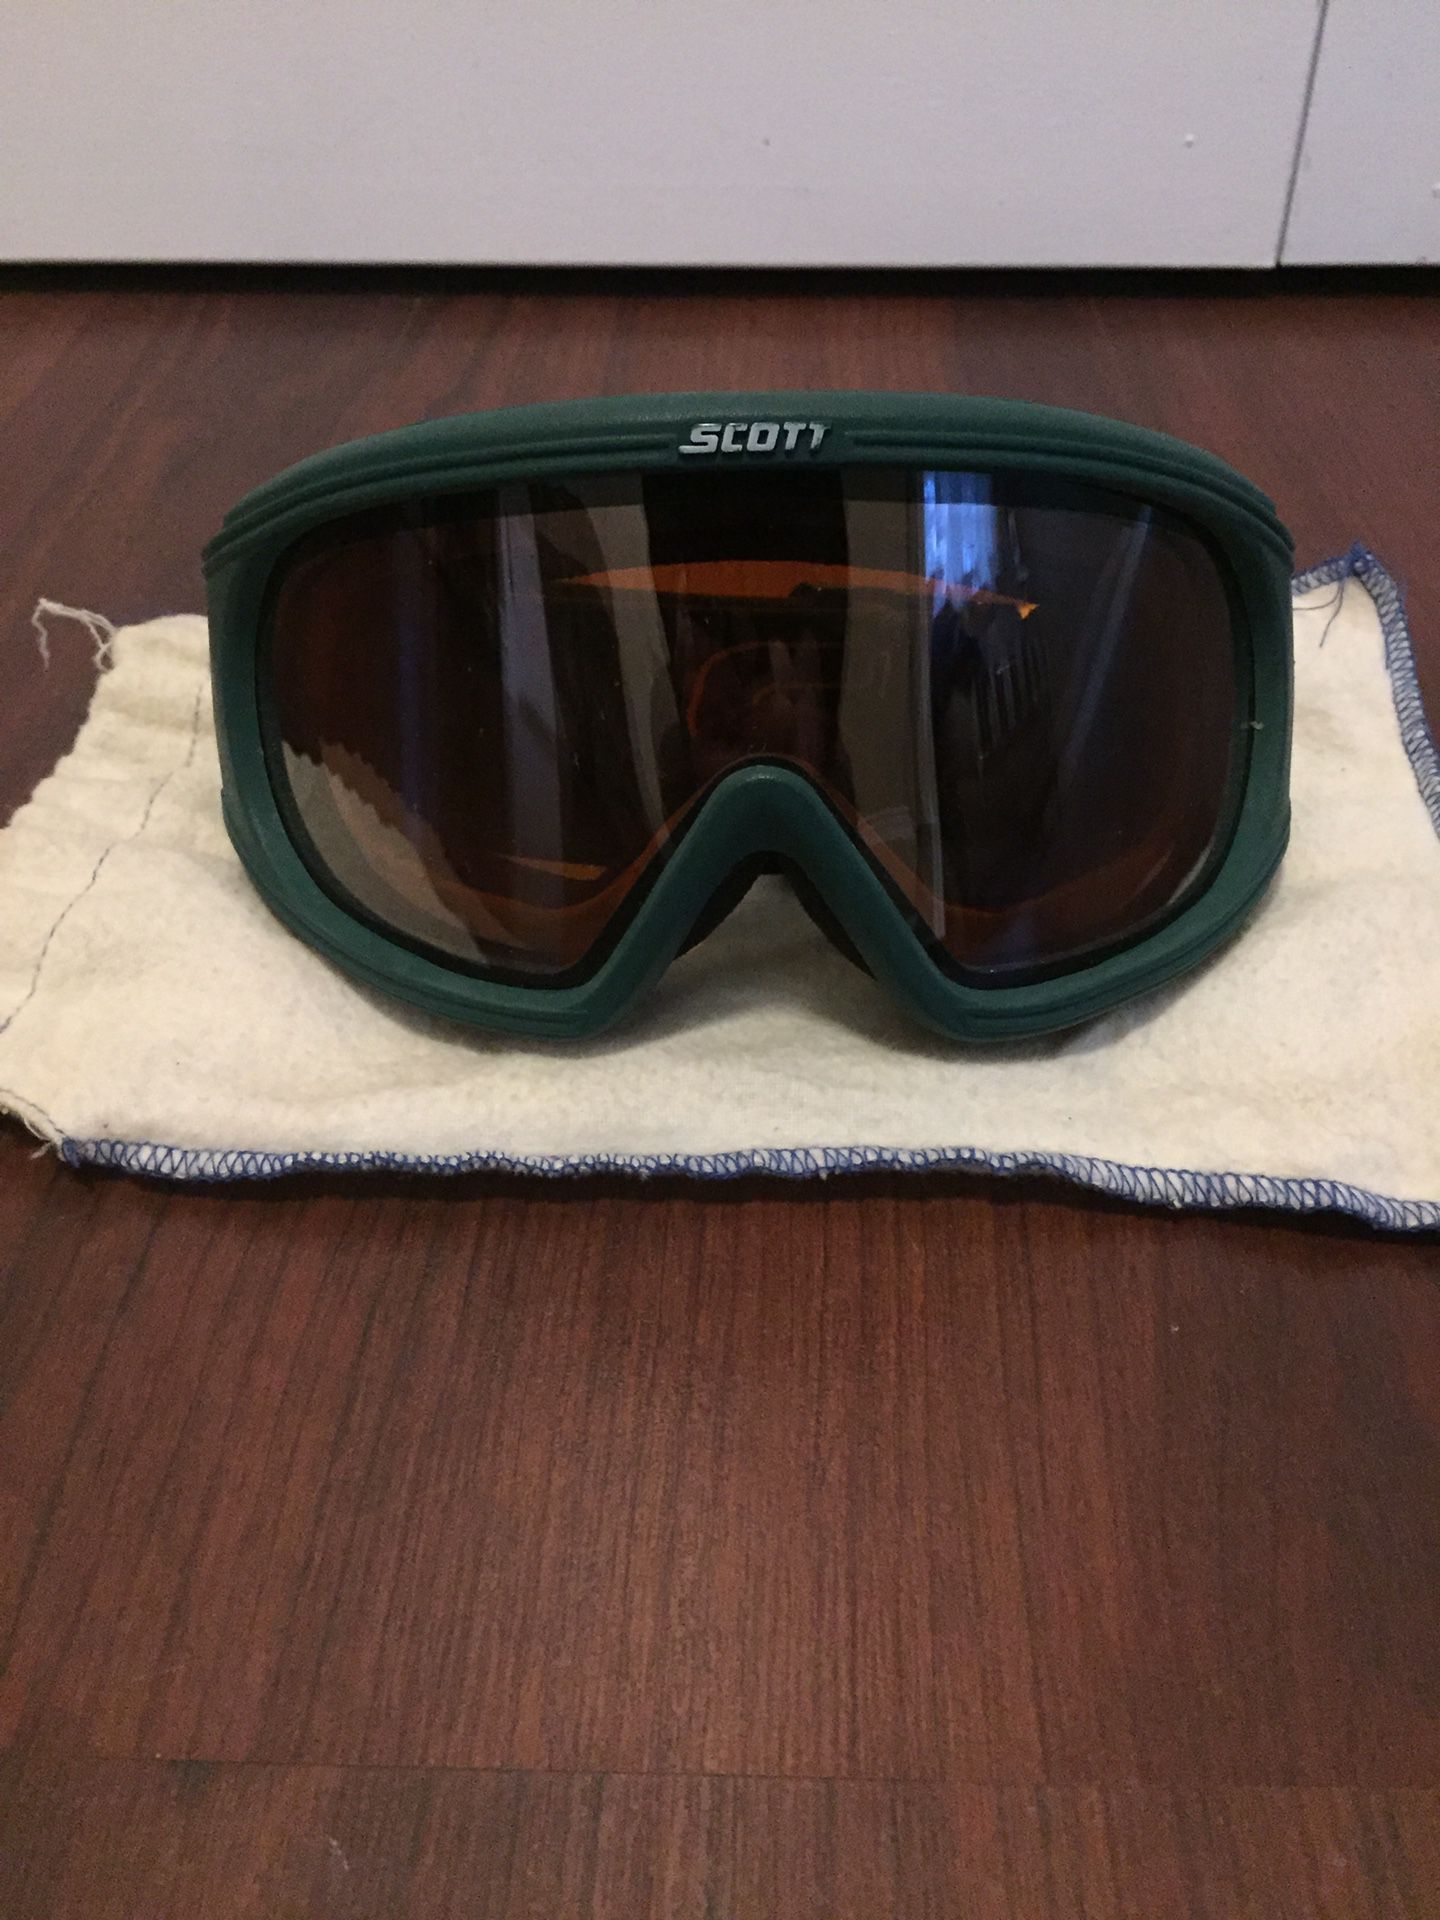 Scott Outdoor Winter Sports Goggles w/ Fabric Pouch